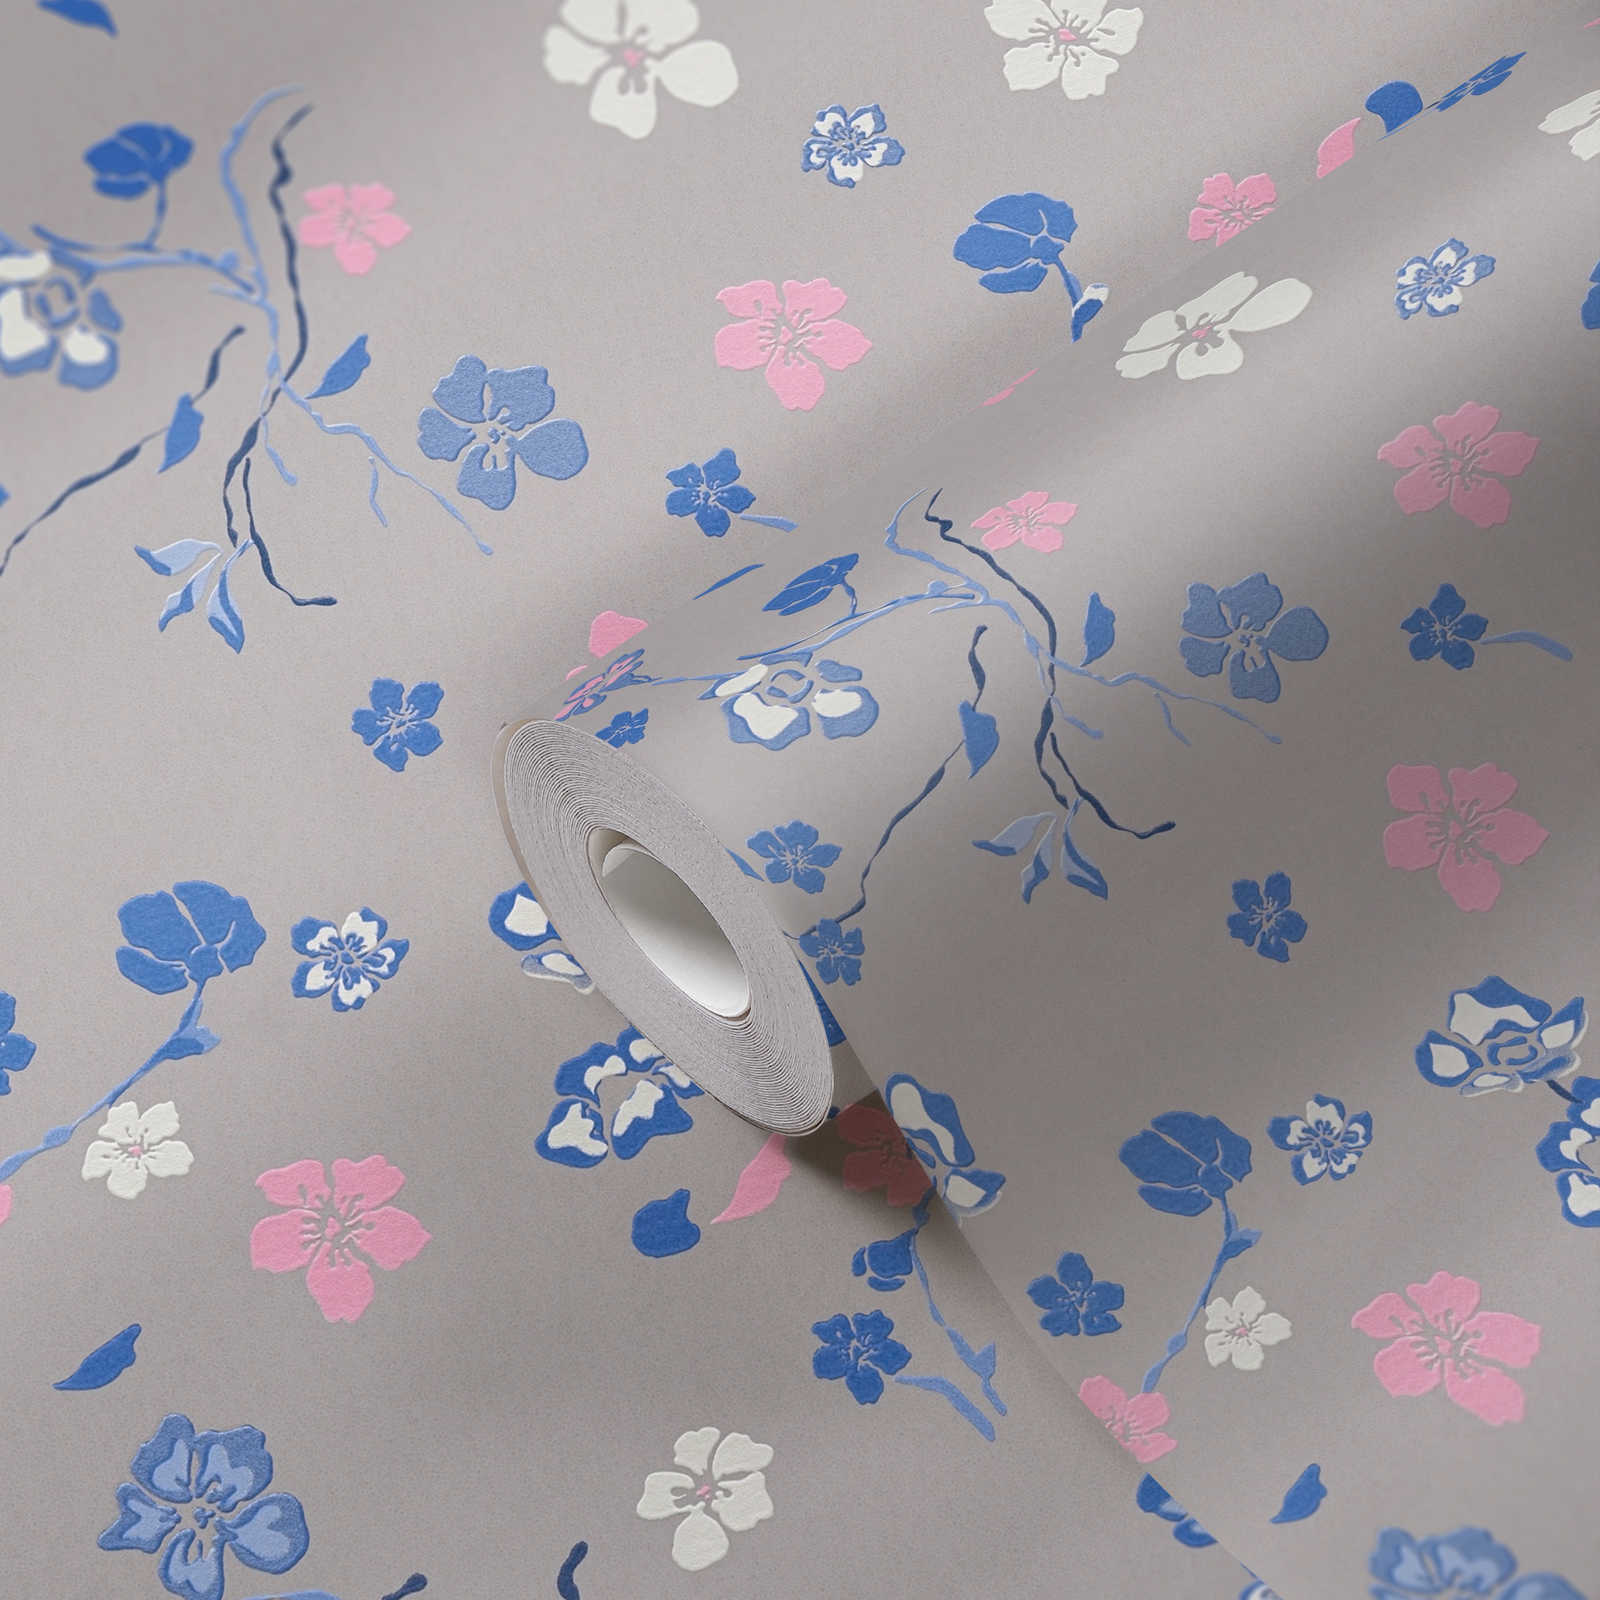             Floral pattern wallpaper with glossy effect - grey, blue, pink
        